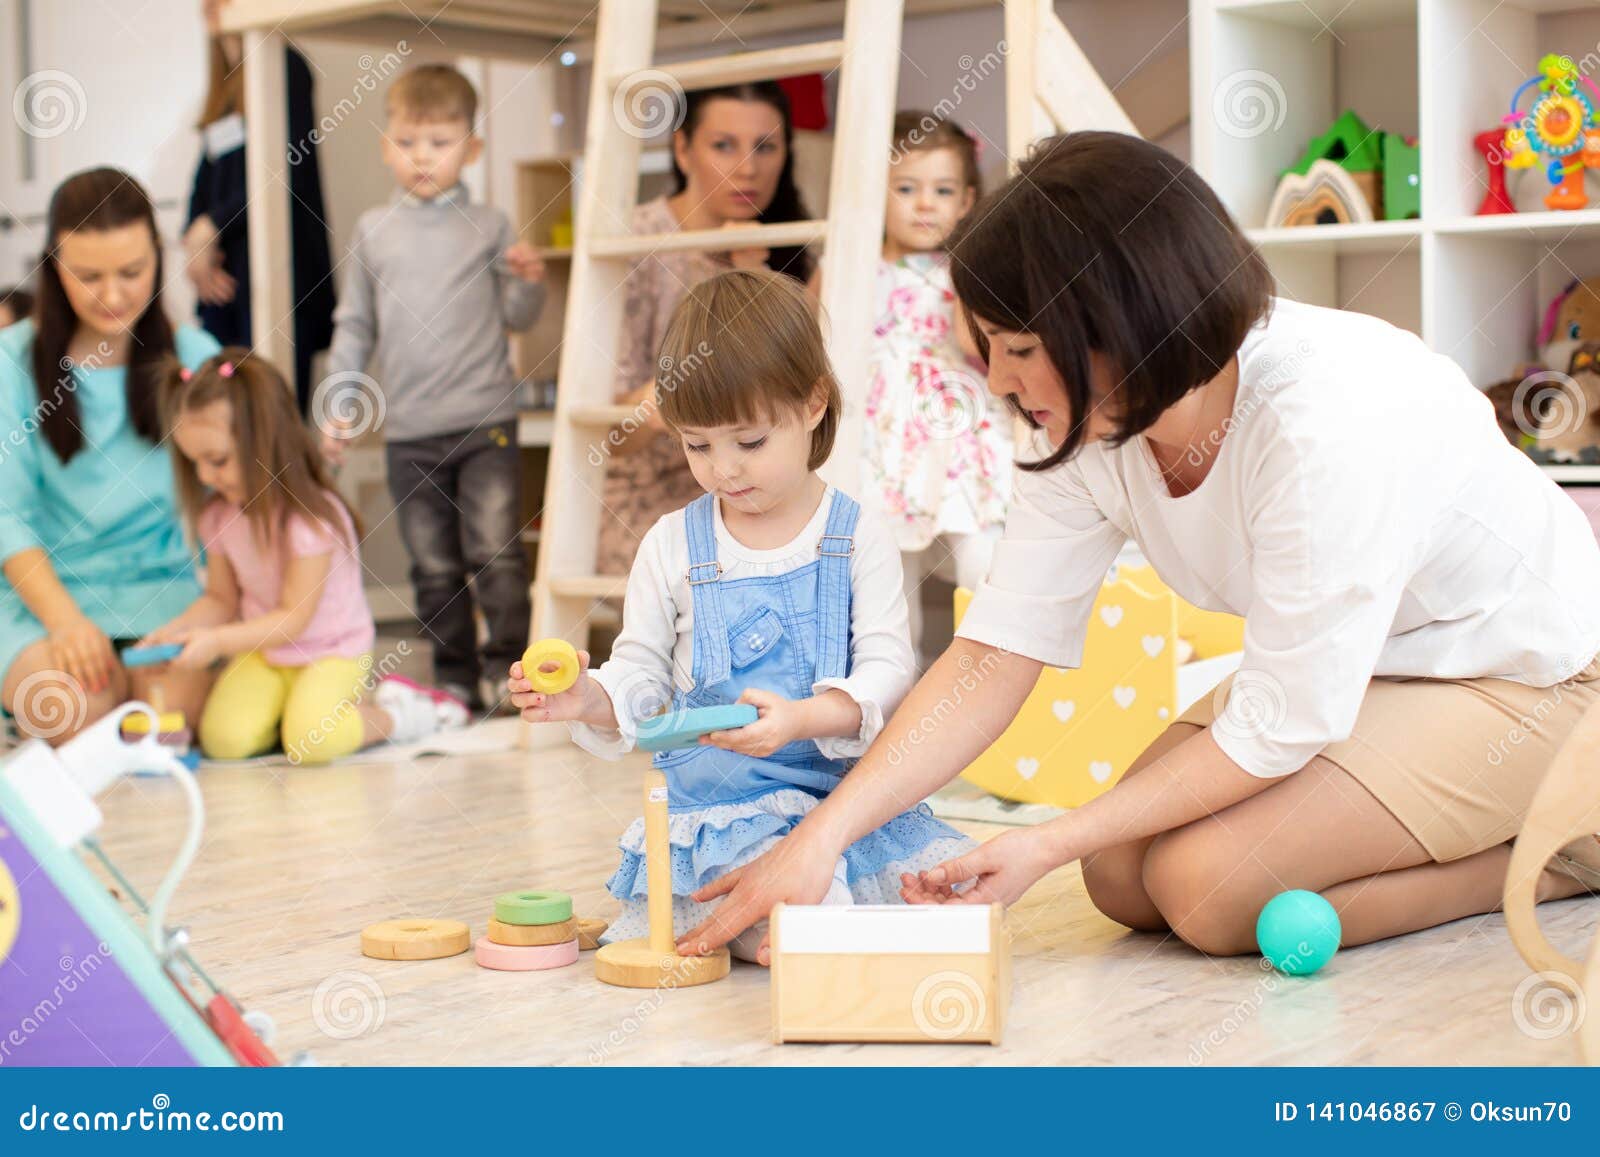 parents with children playing in playroom in daycare